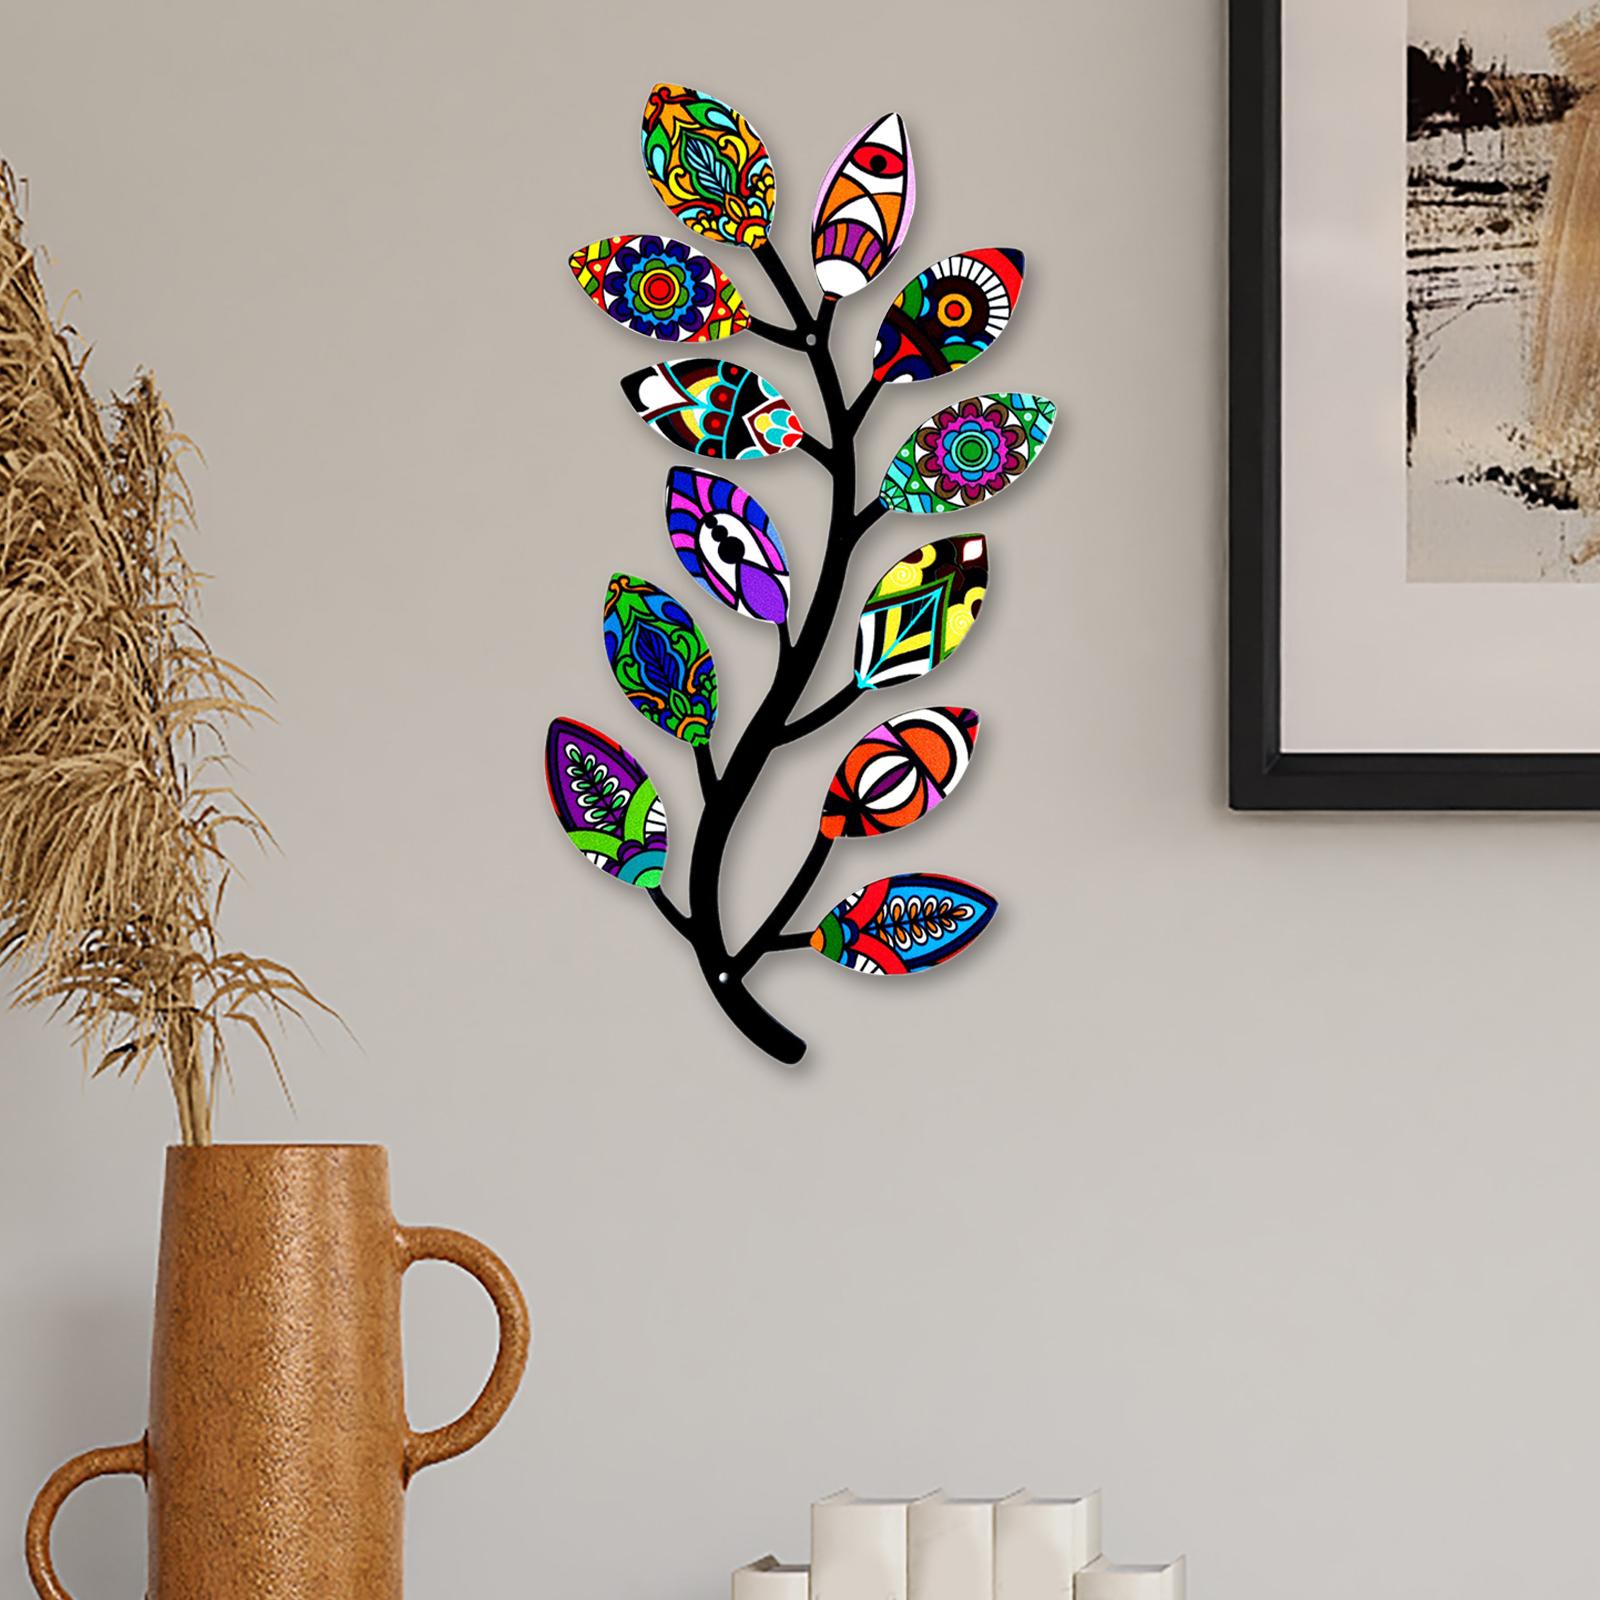 Metal Tree Branch Wall Art Decor, Wall Sculpture for Home Living Room Patio StyleC